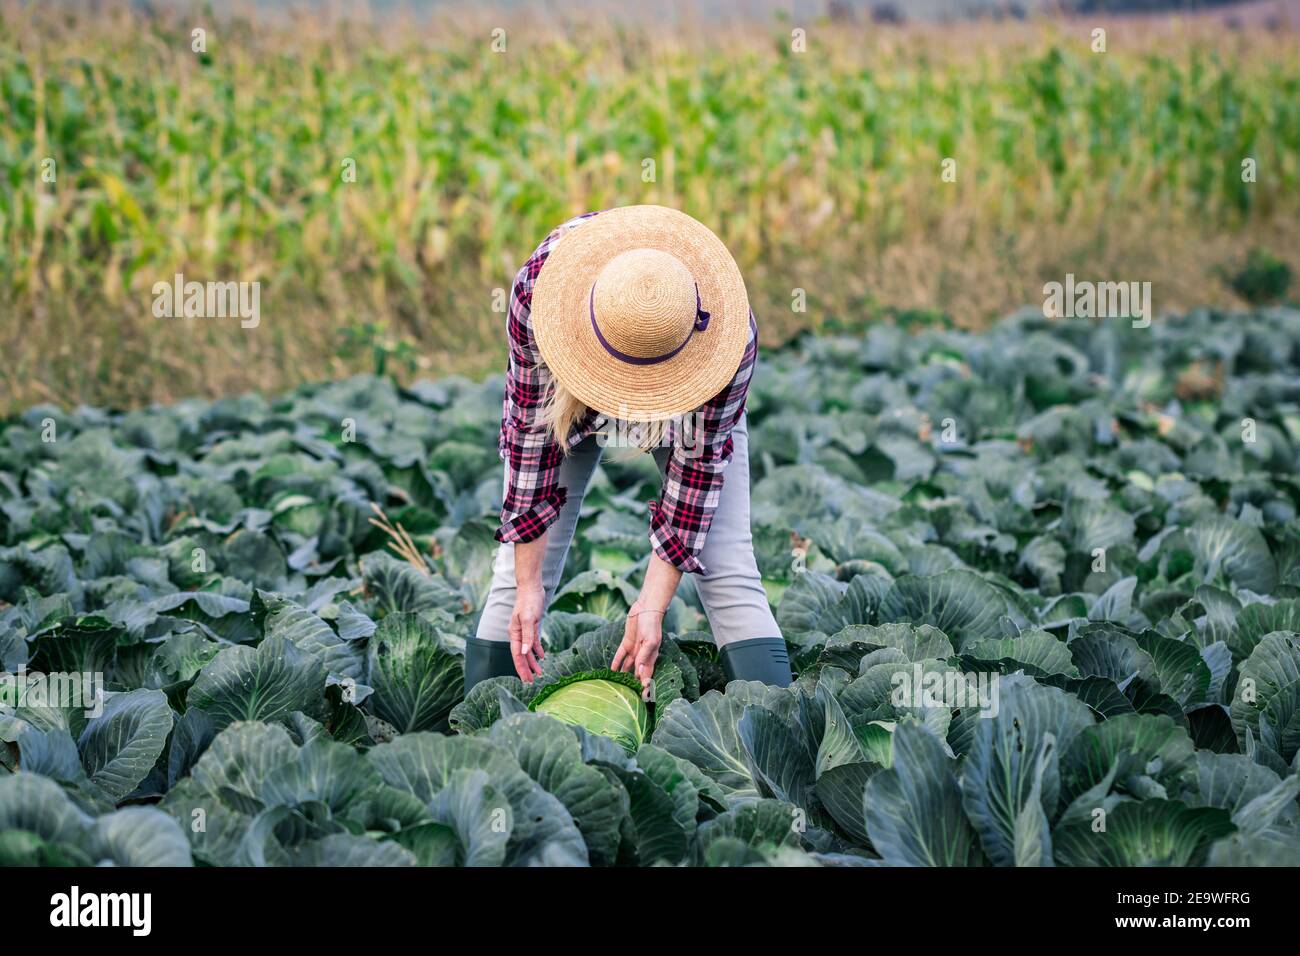 Woman picking cabbage vegetable at field. Female farmer working at her organic farm. Harvesting at autumn season Stock Photo